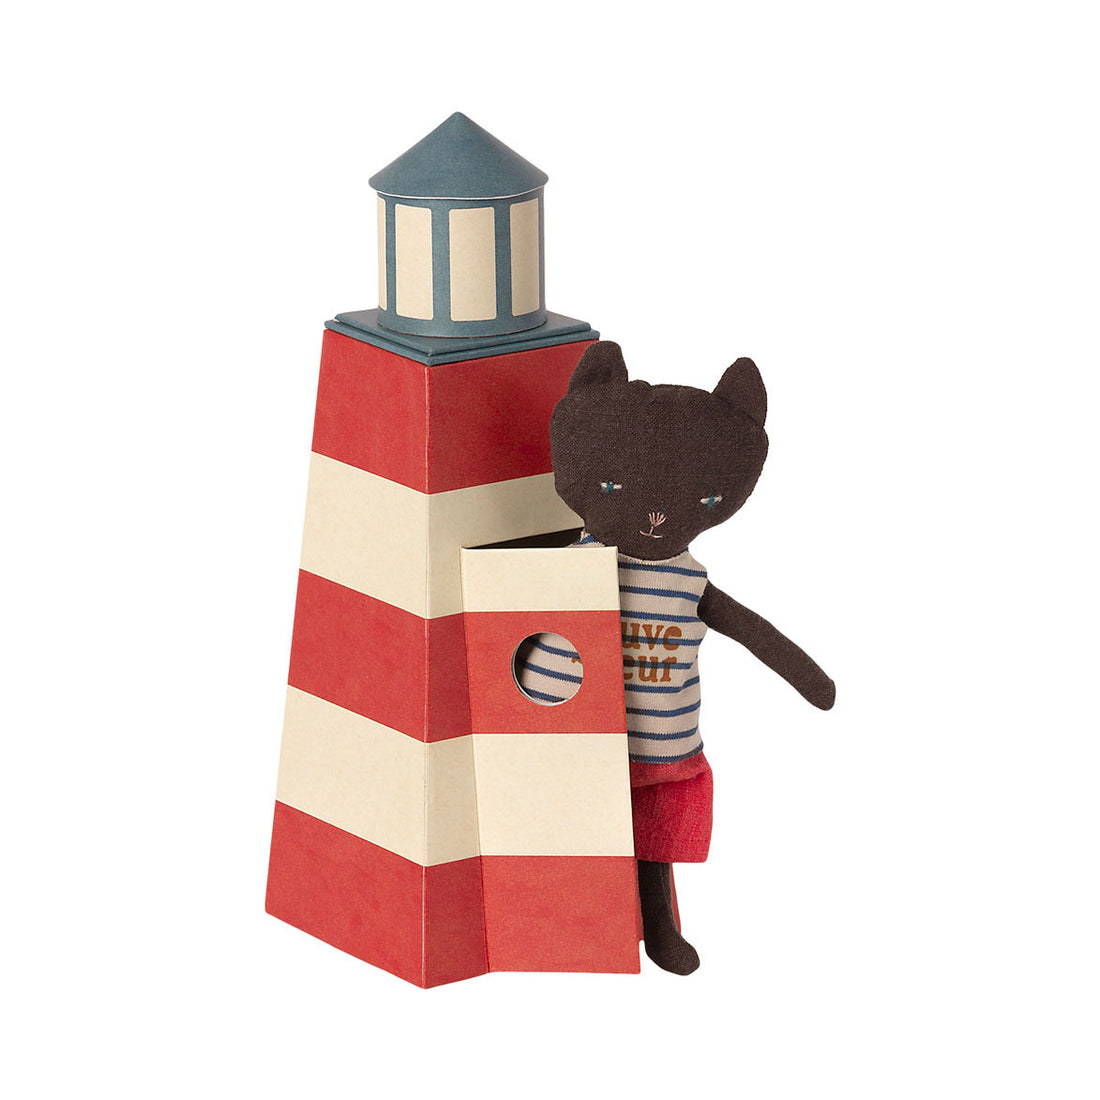 Maileg Sauveteur, Tower with cat